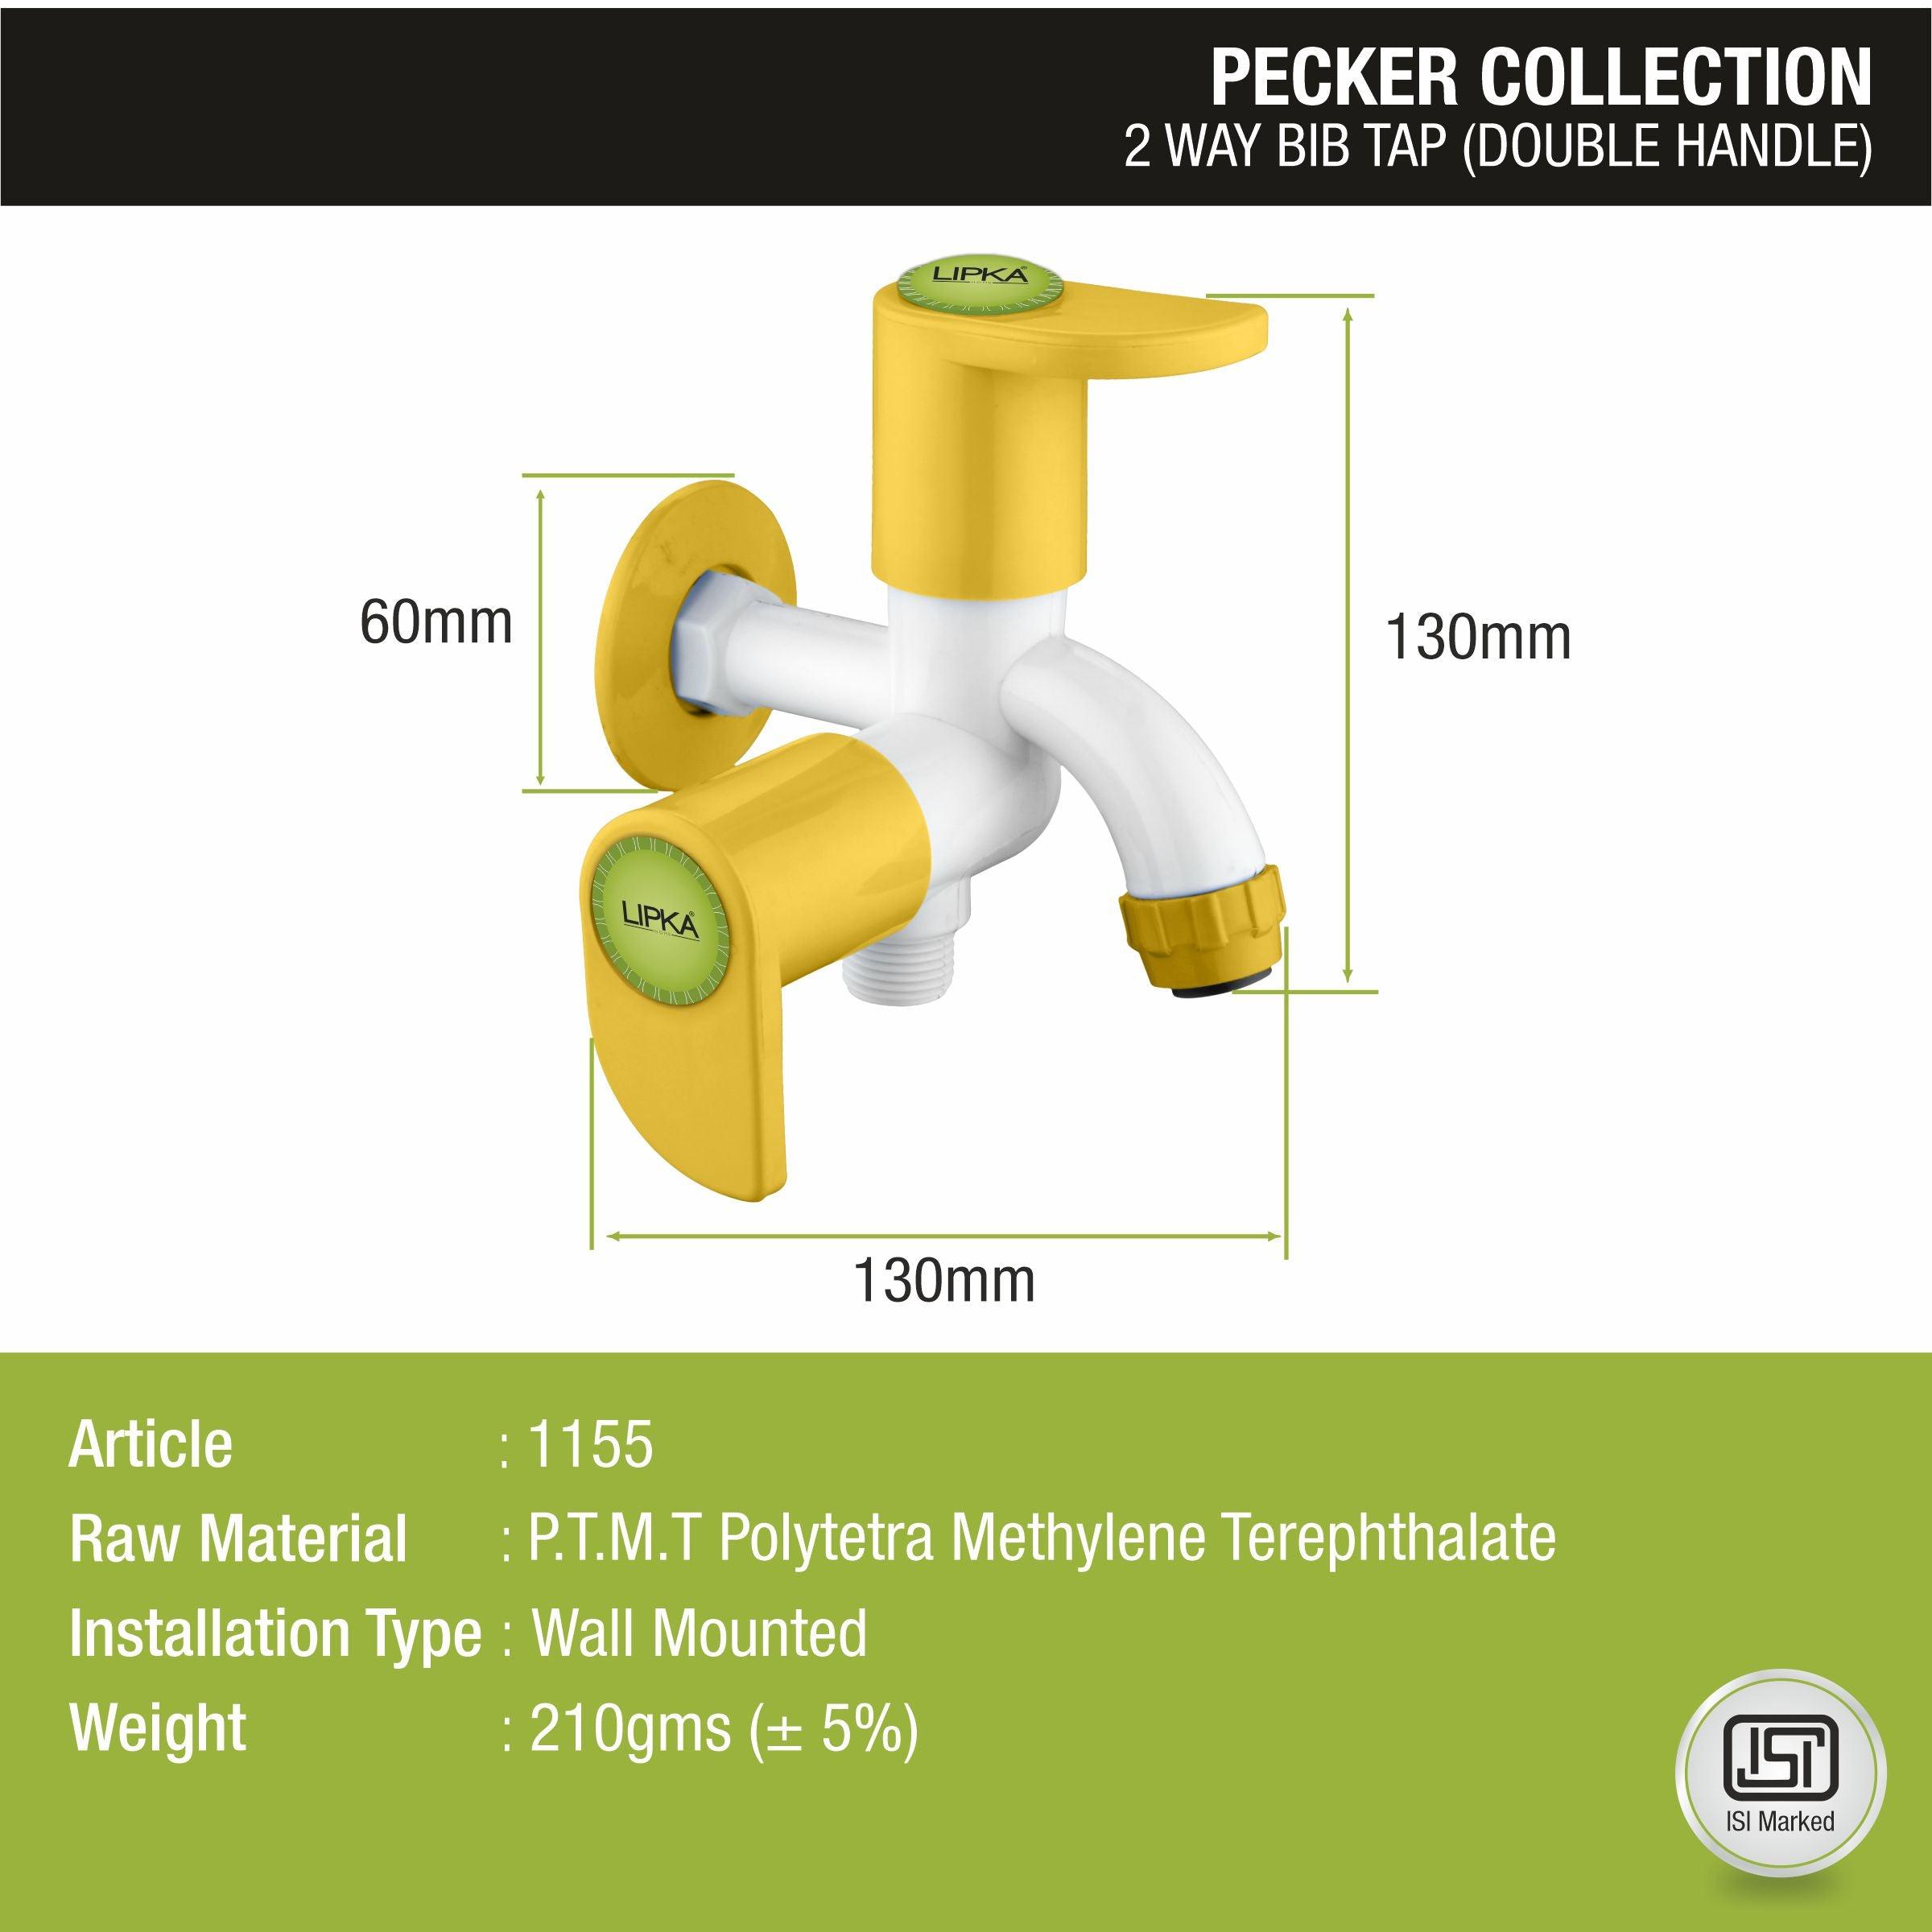 Pecker Two Way Bib Tap PTMT Faucet (Double Handle) sizes and dimensions